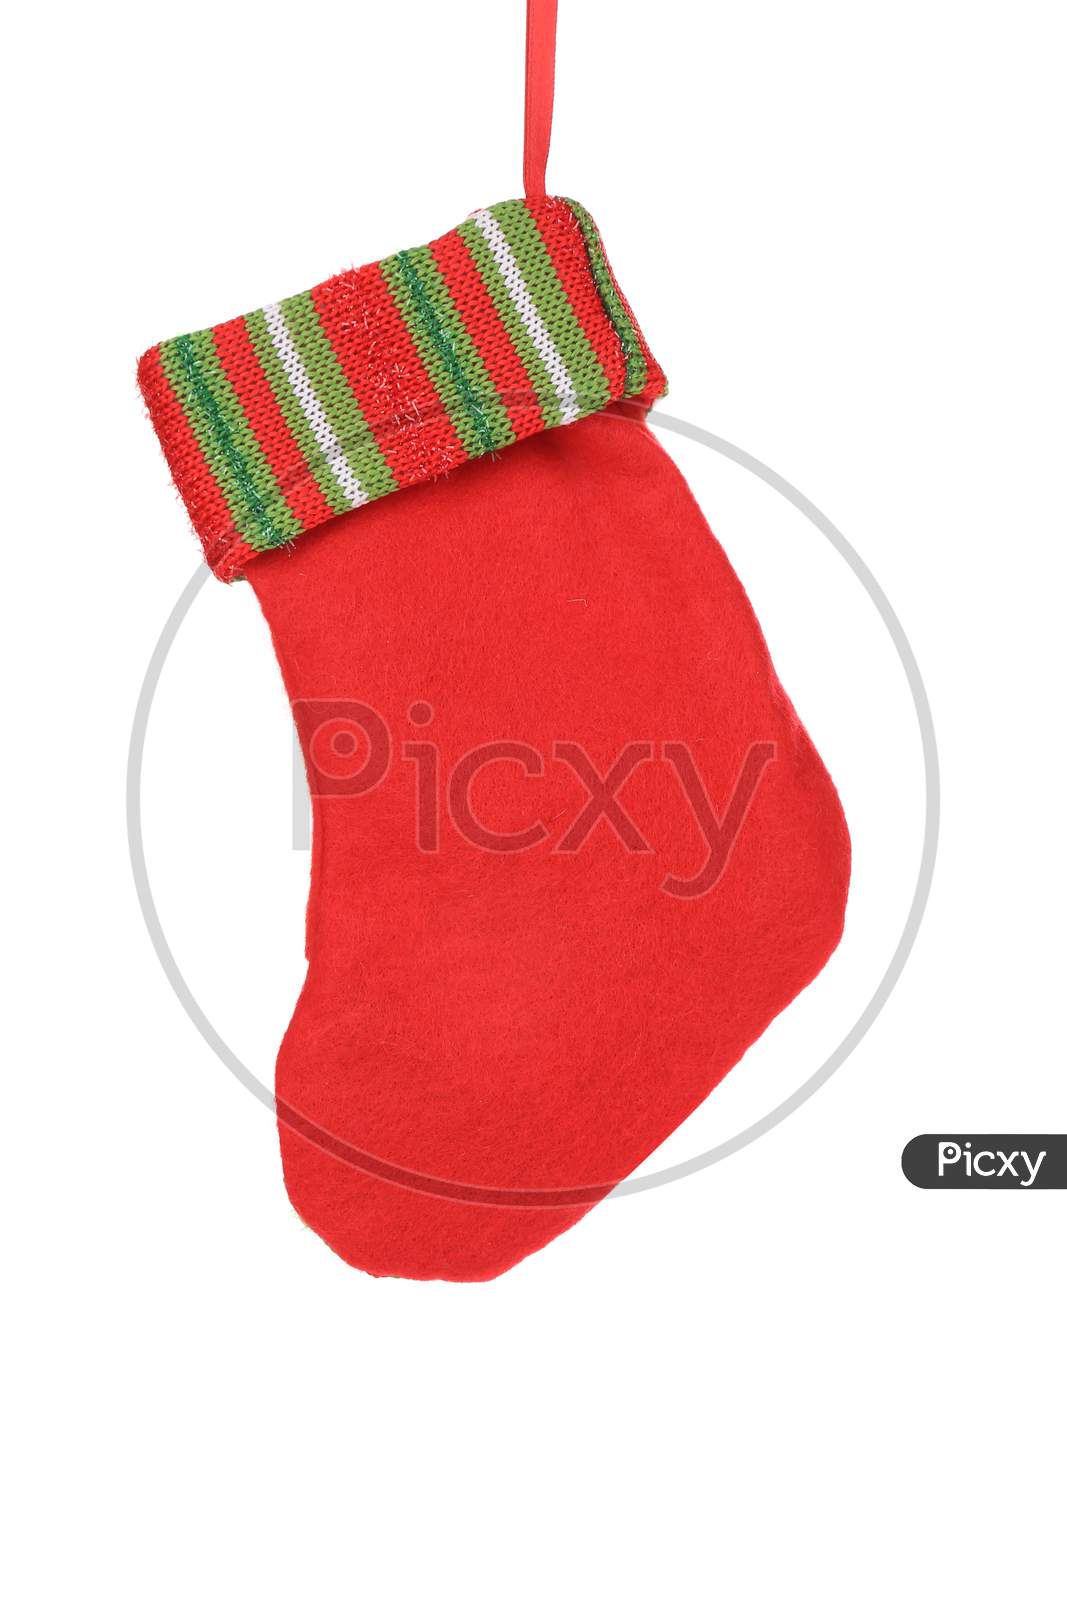 Decorative Christmas Red Sock. Isolated On A White Background.